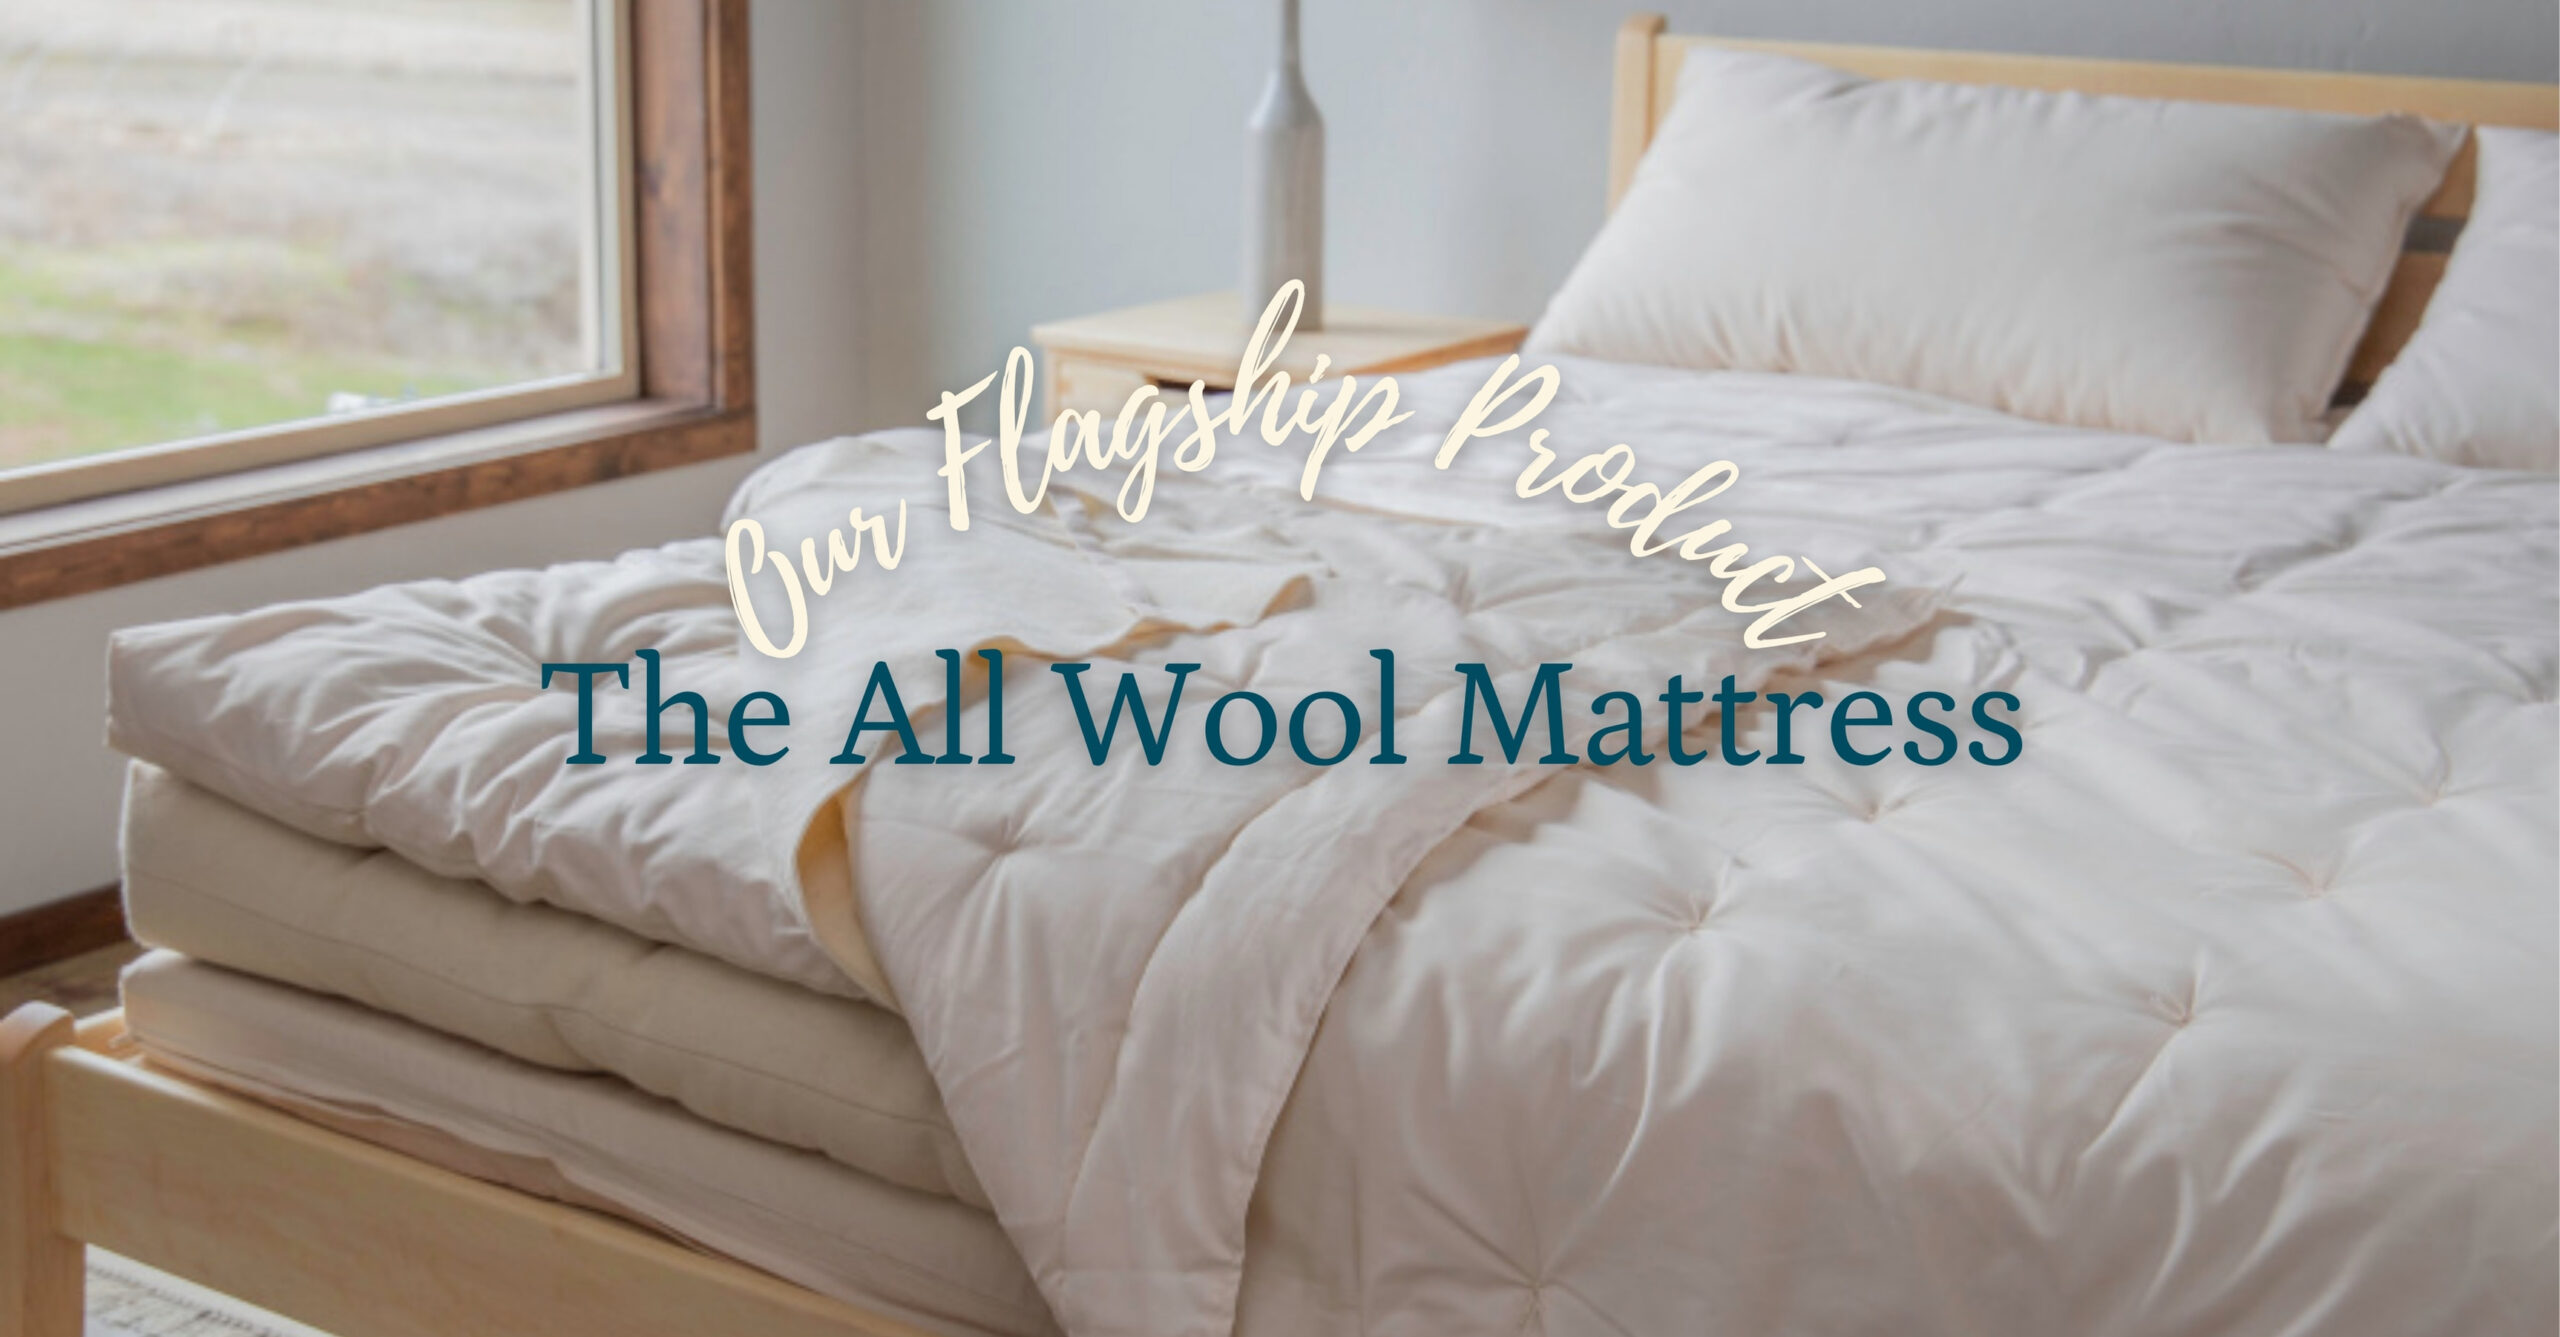 Our Flagship Product: The All Wool Mattress 1